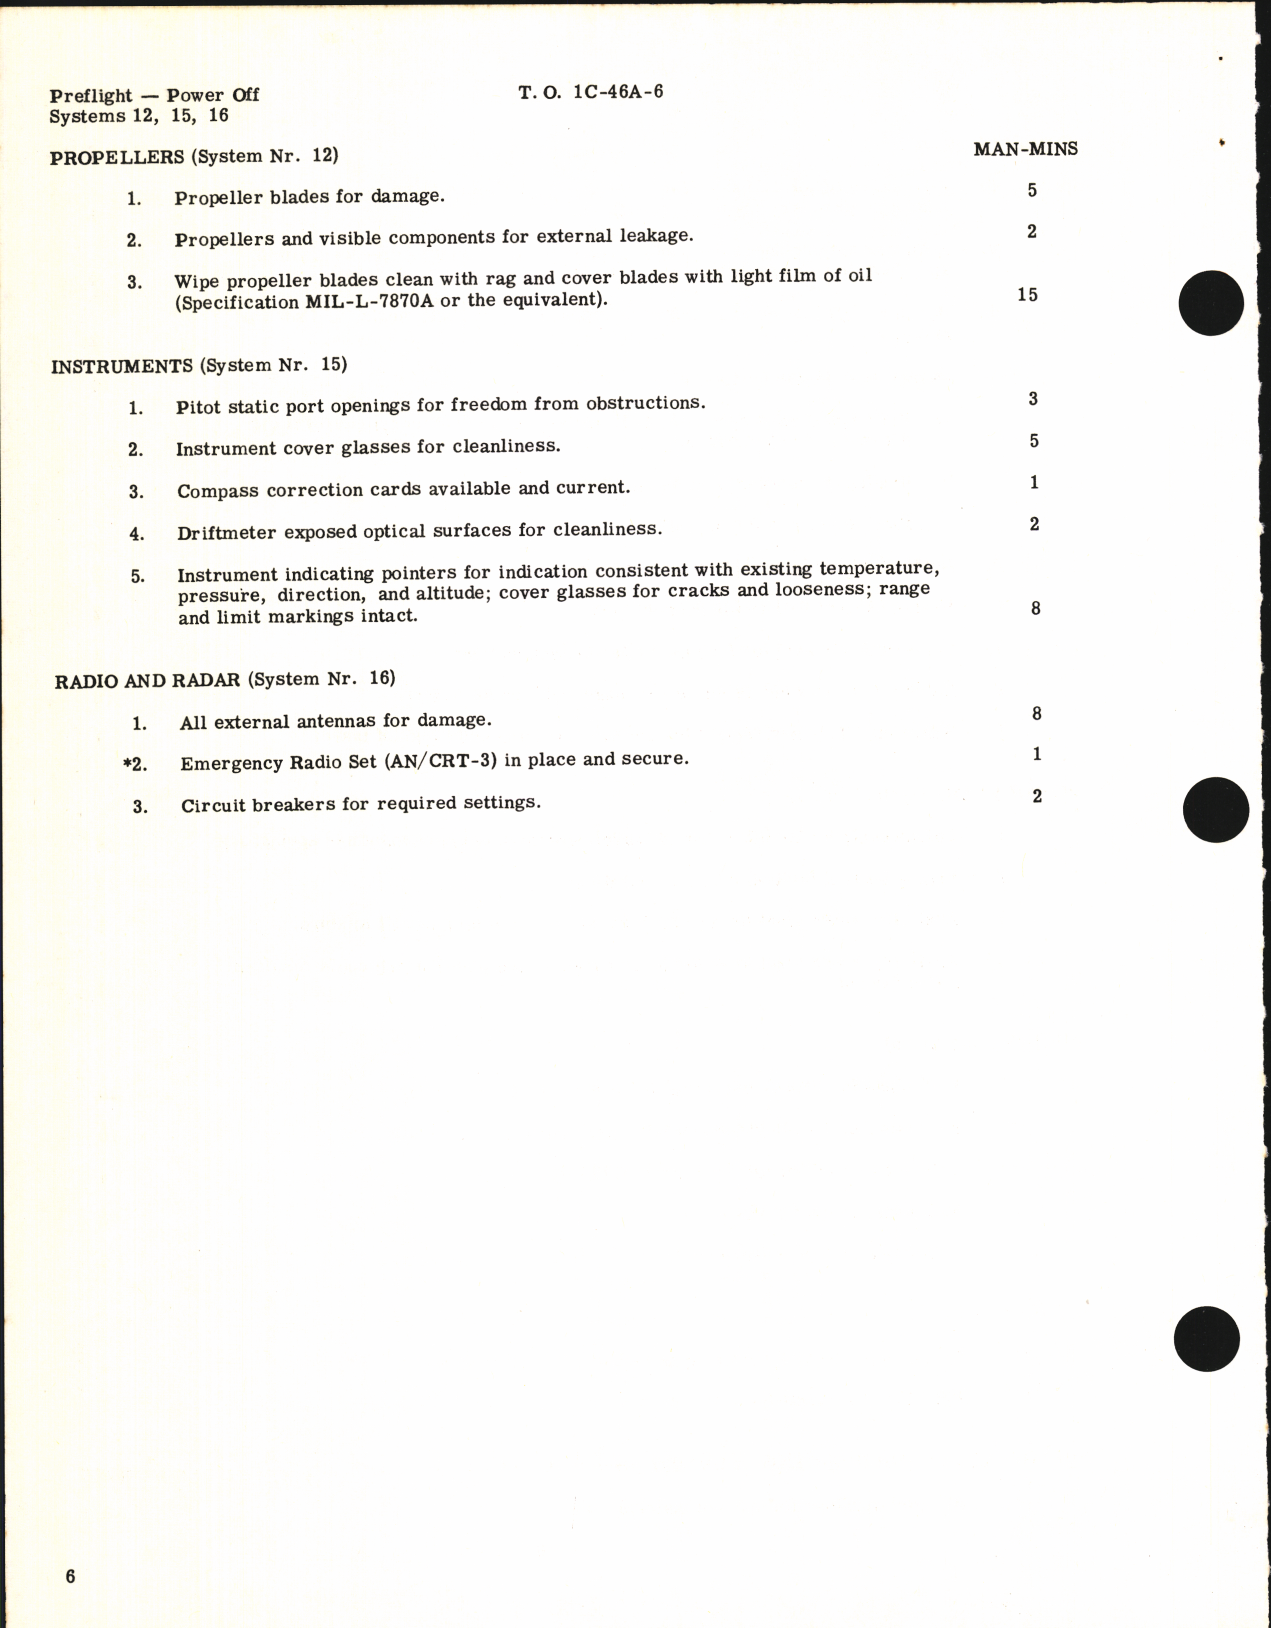 Sample page 8 from AirCorps Library document: Inspection Requirements for C-46A, C-46D, and C-46F Aircraft